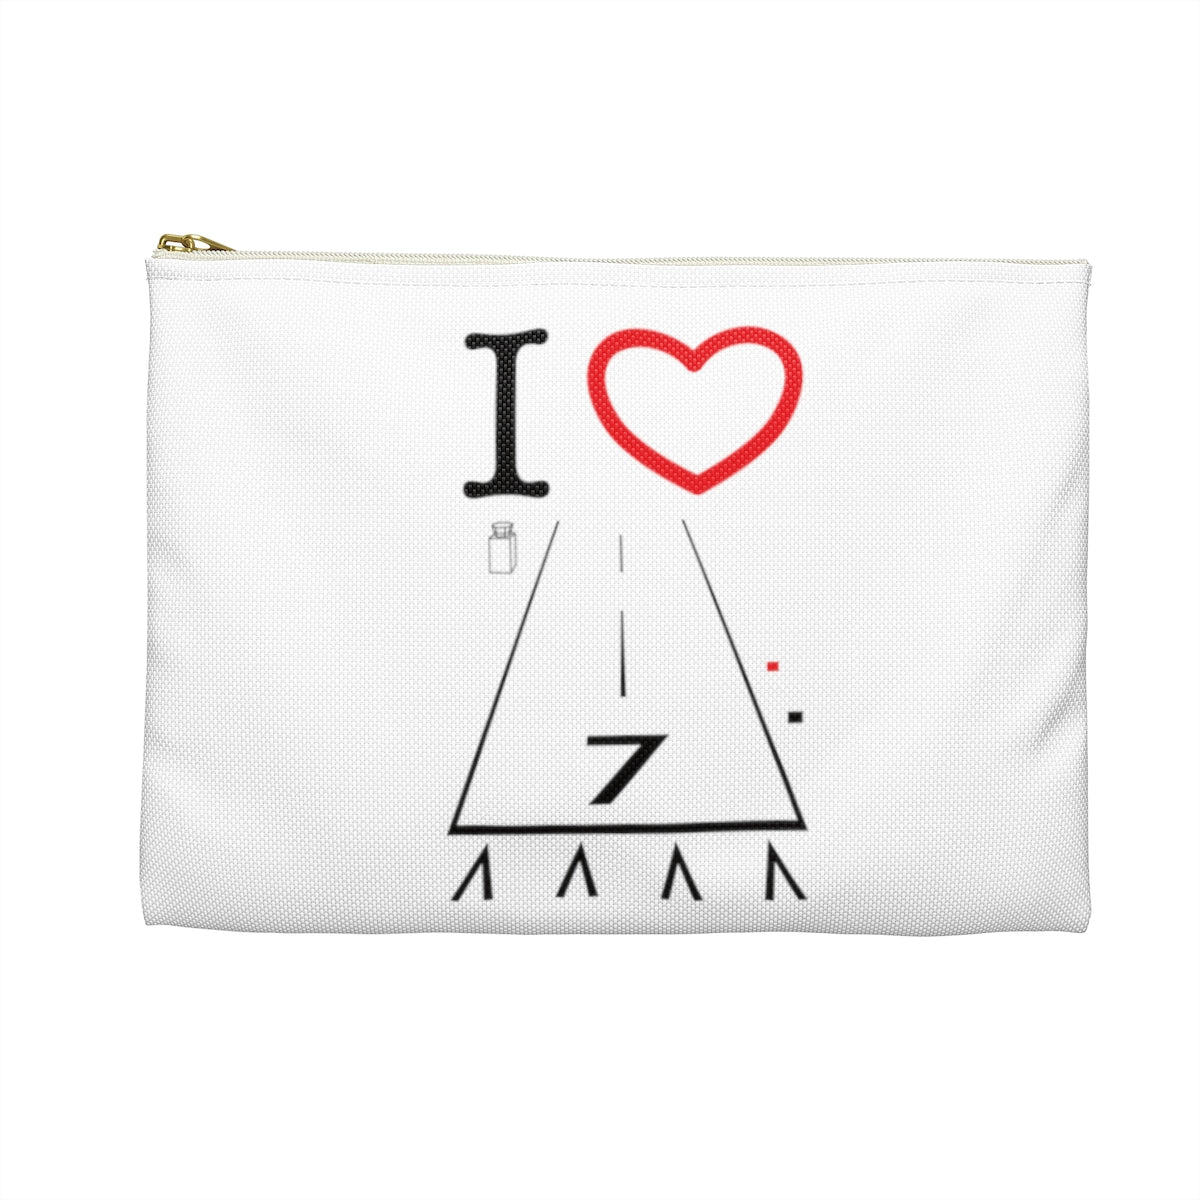 Hawthorne Airport Runway 25 / Runway 7 Accessory Pouch